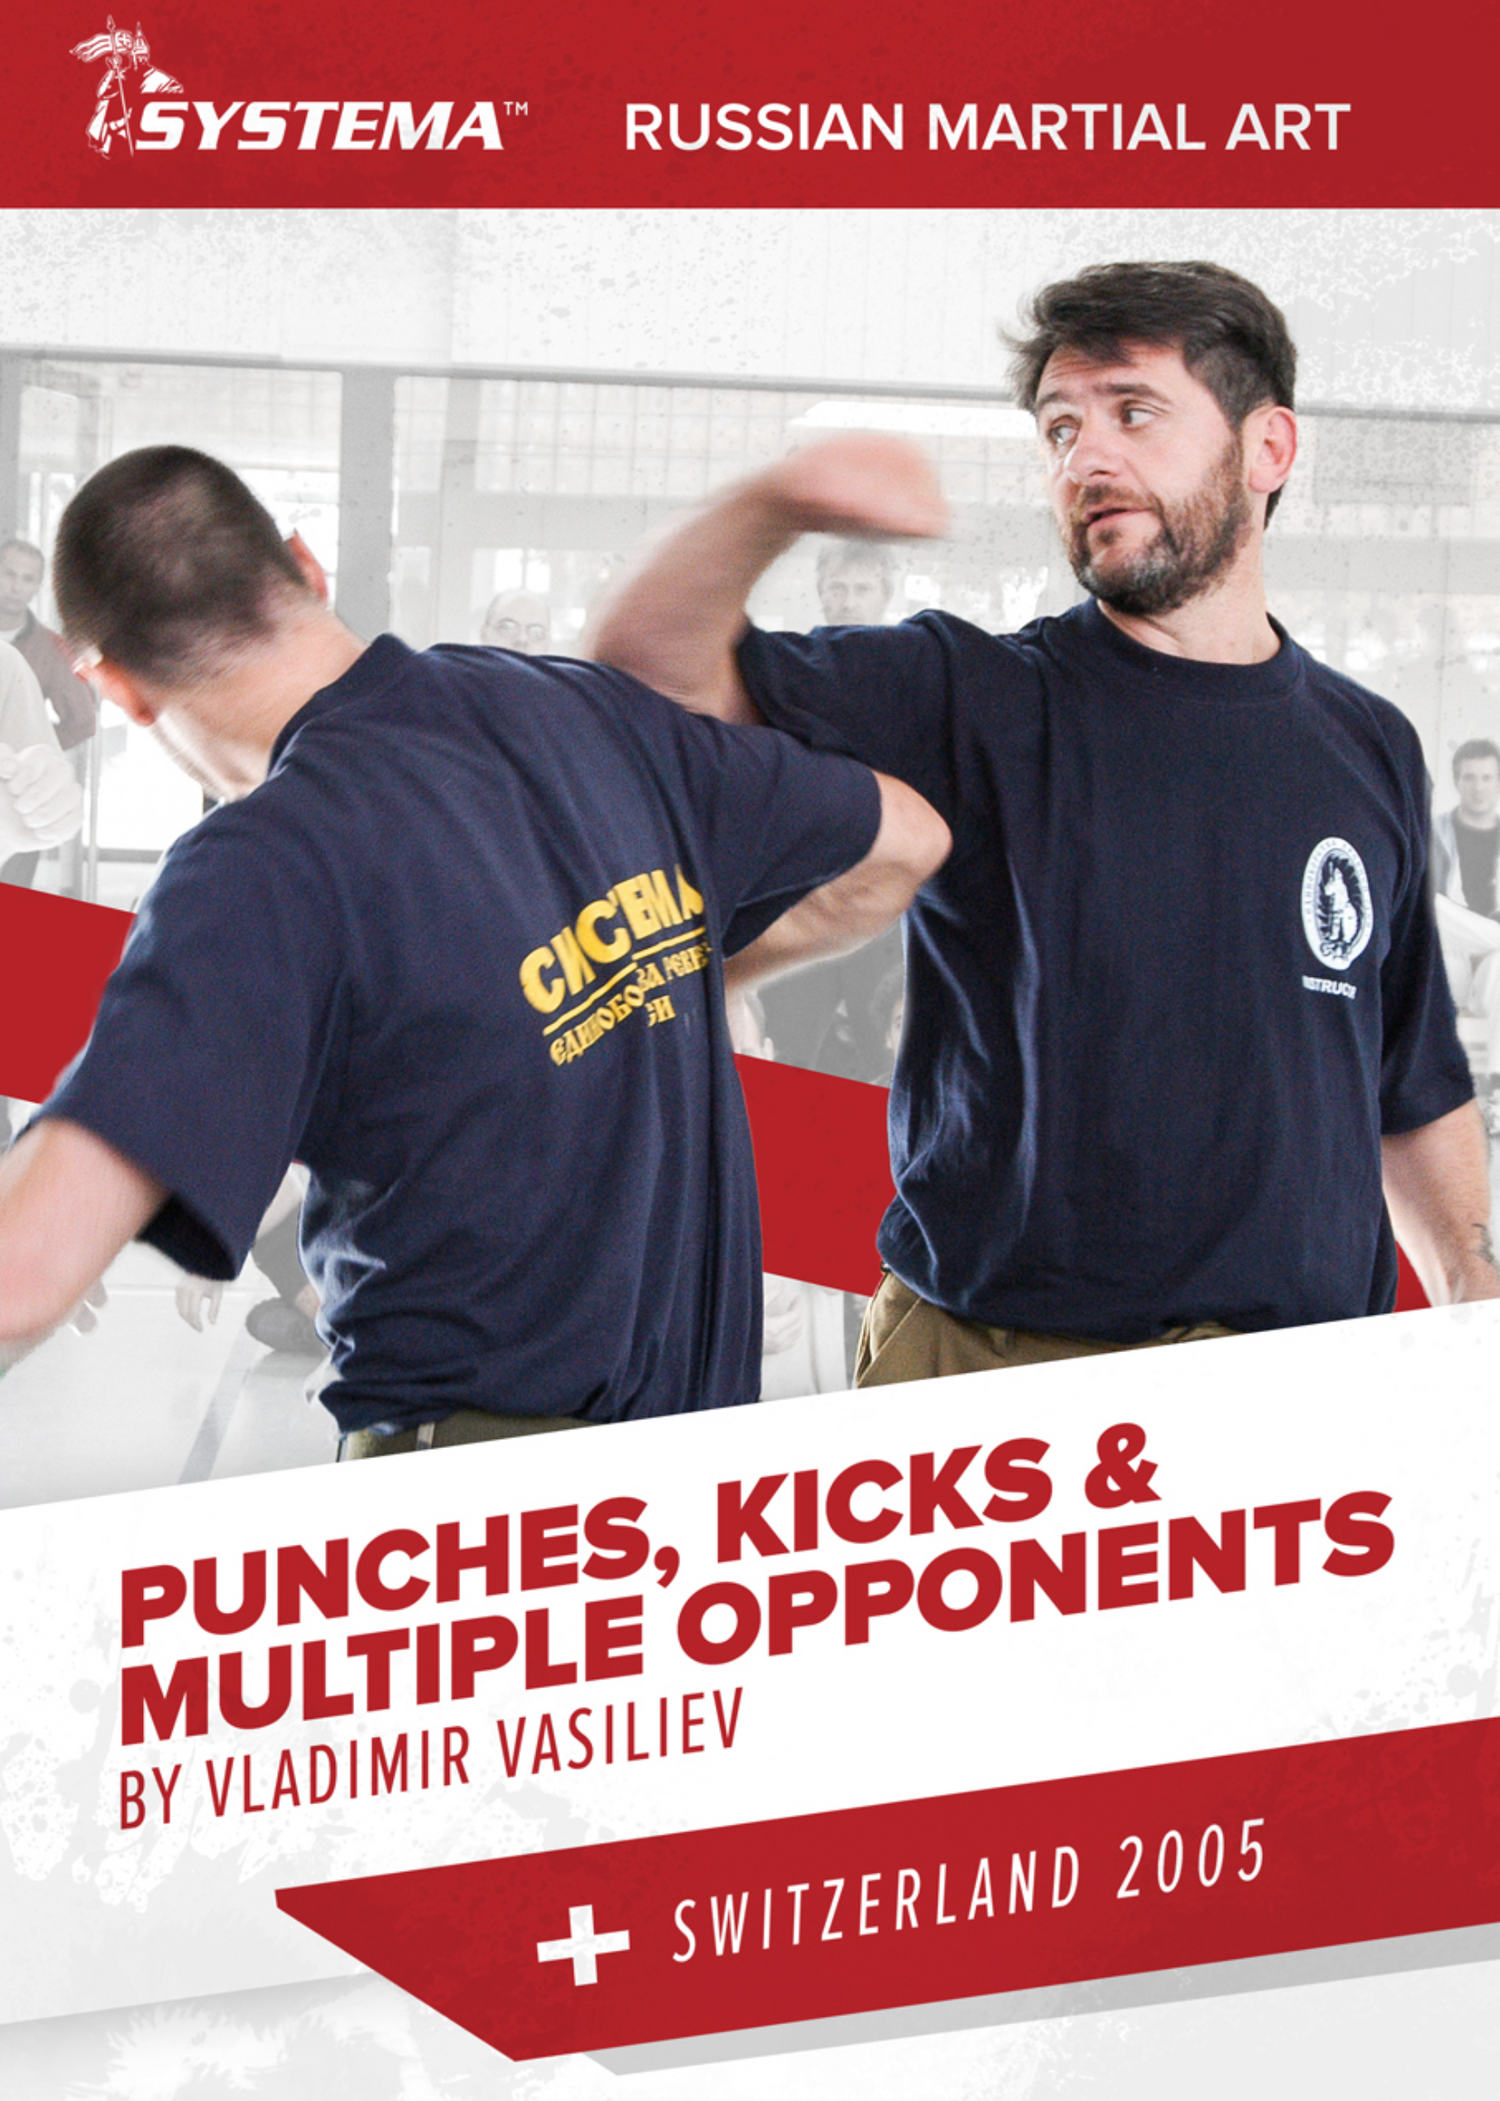 Systema Punches, Kicks, and Multiple Opponents DVD by Vladimir Vasiliev - Budovideos Inc